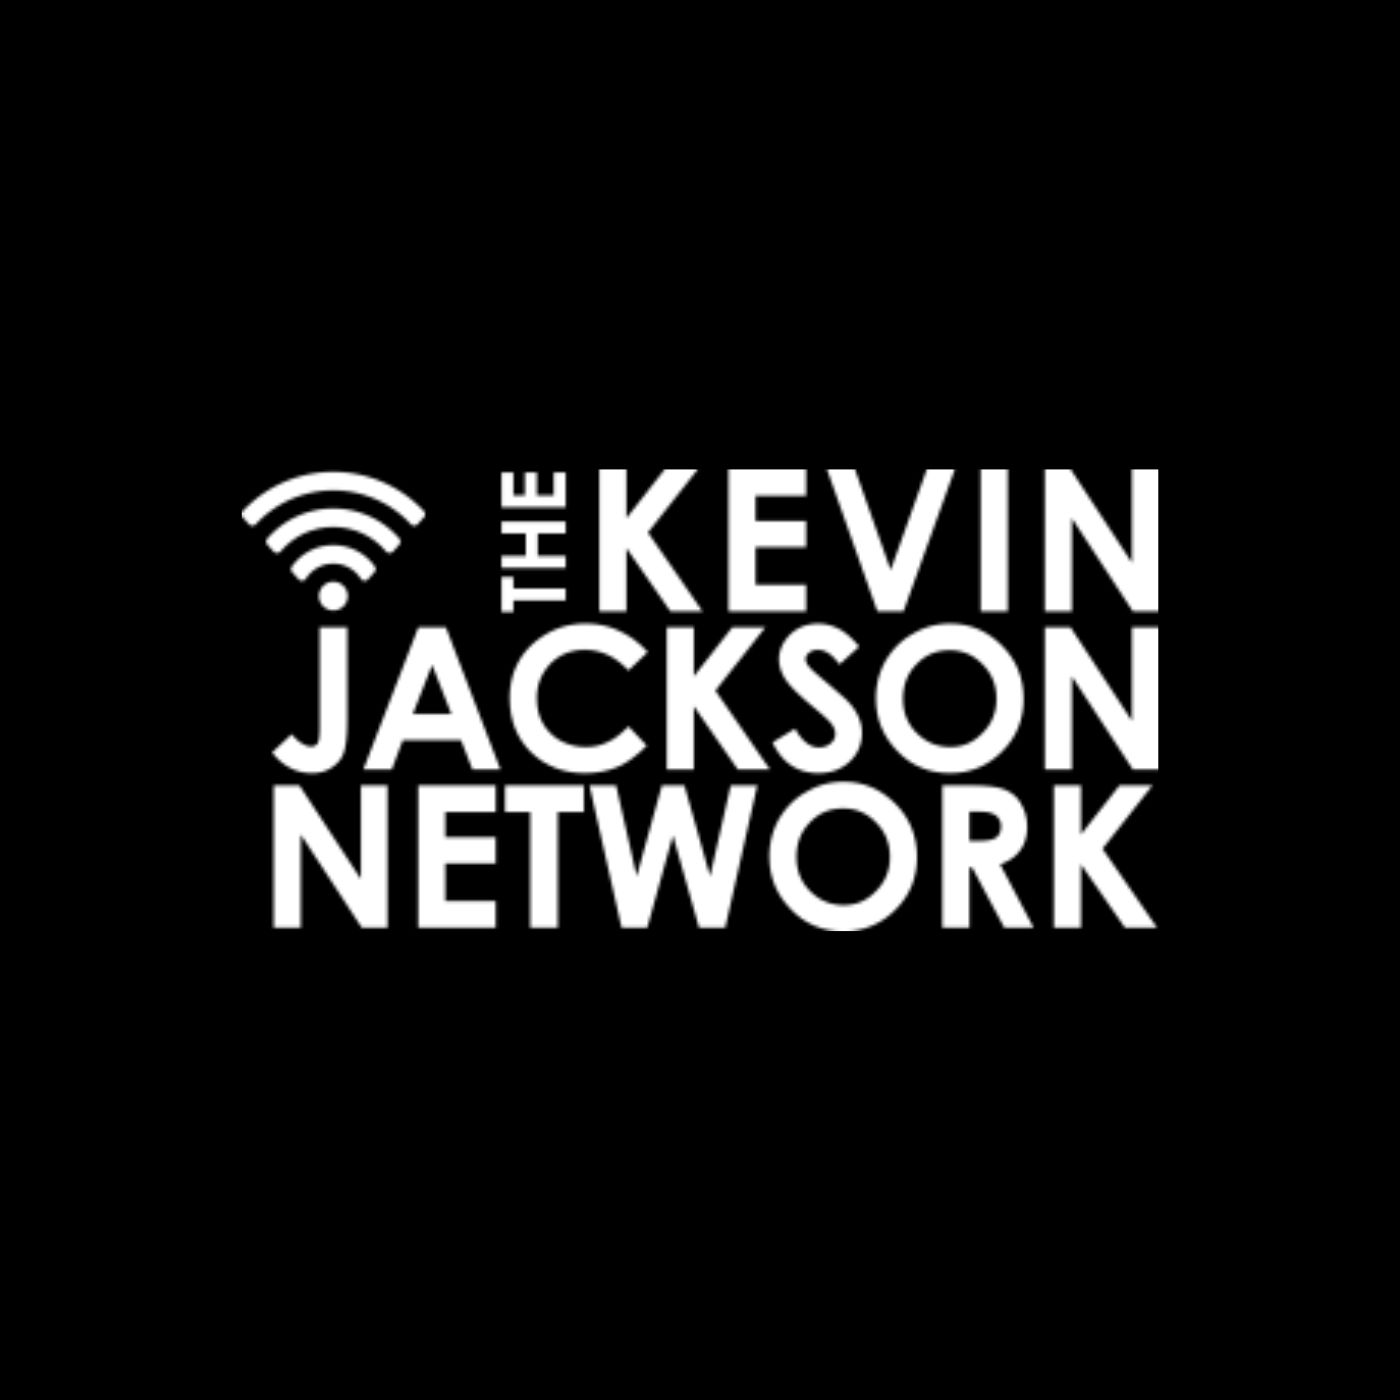 THE KEVIN JACKSON NETWORK